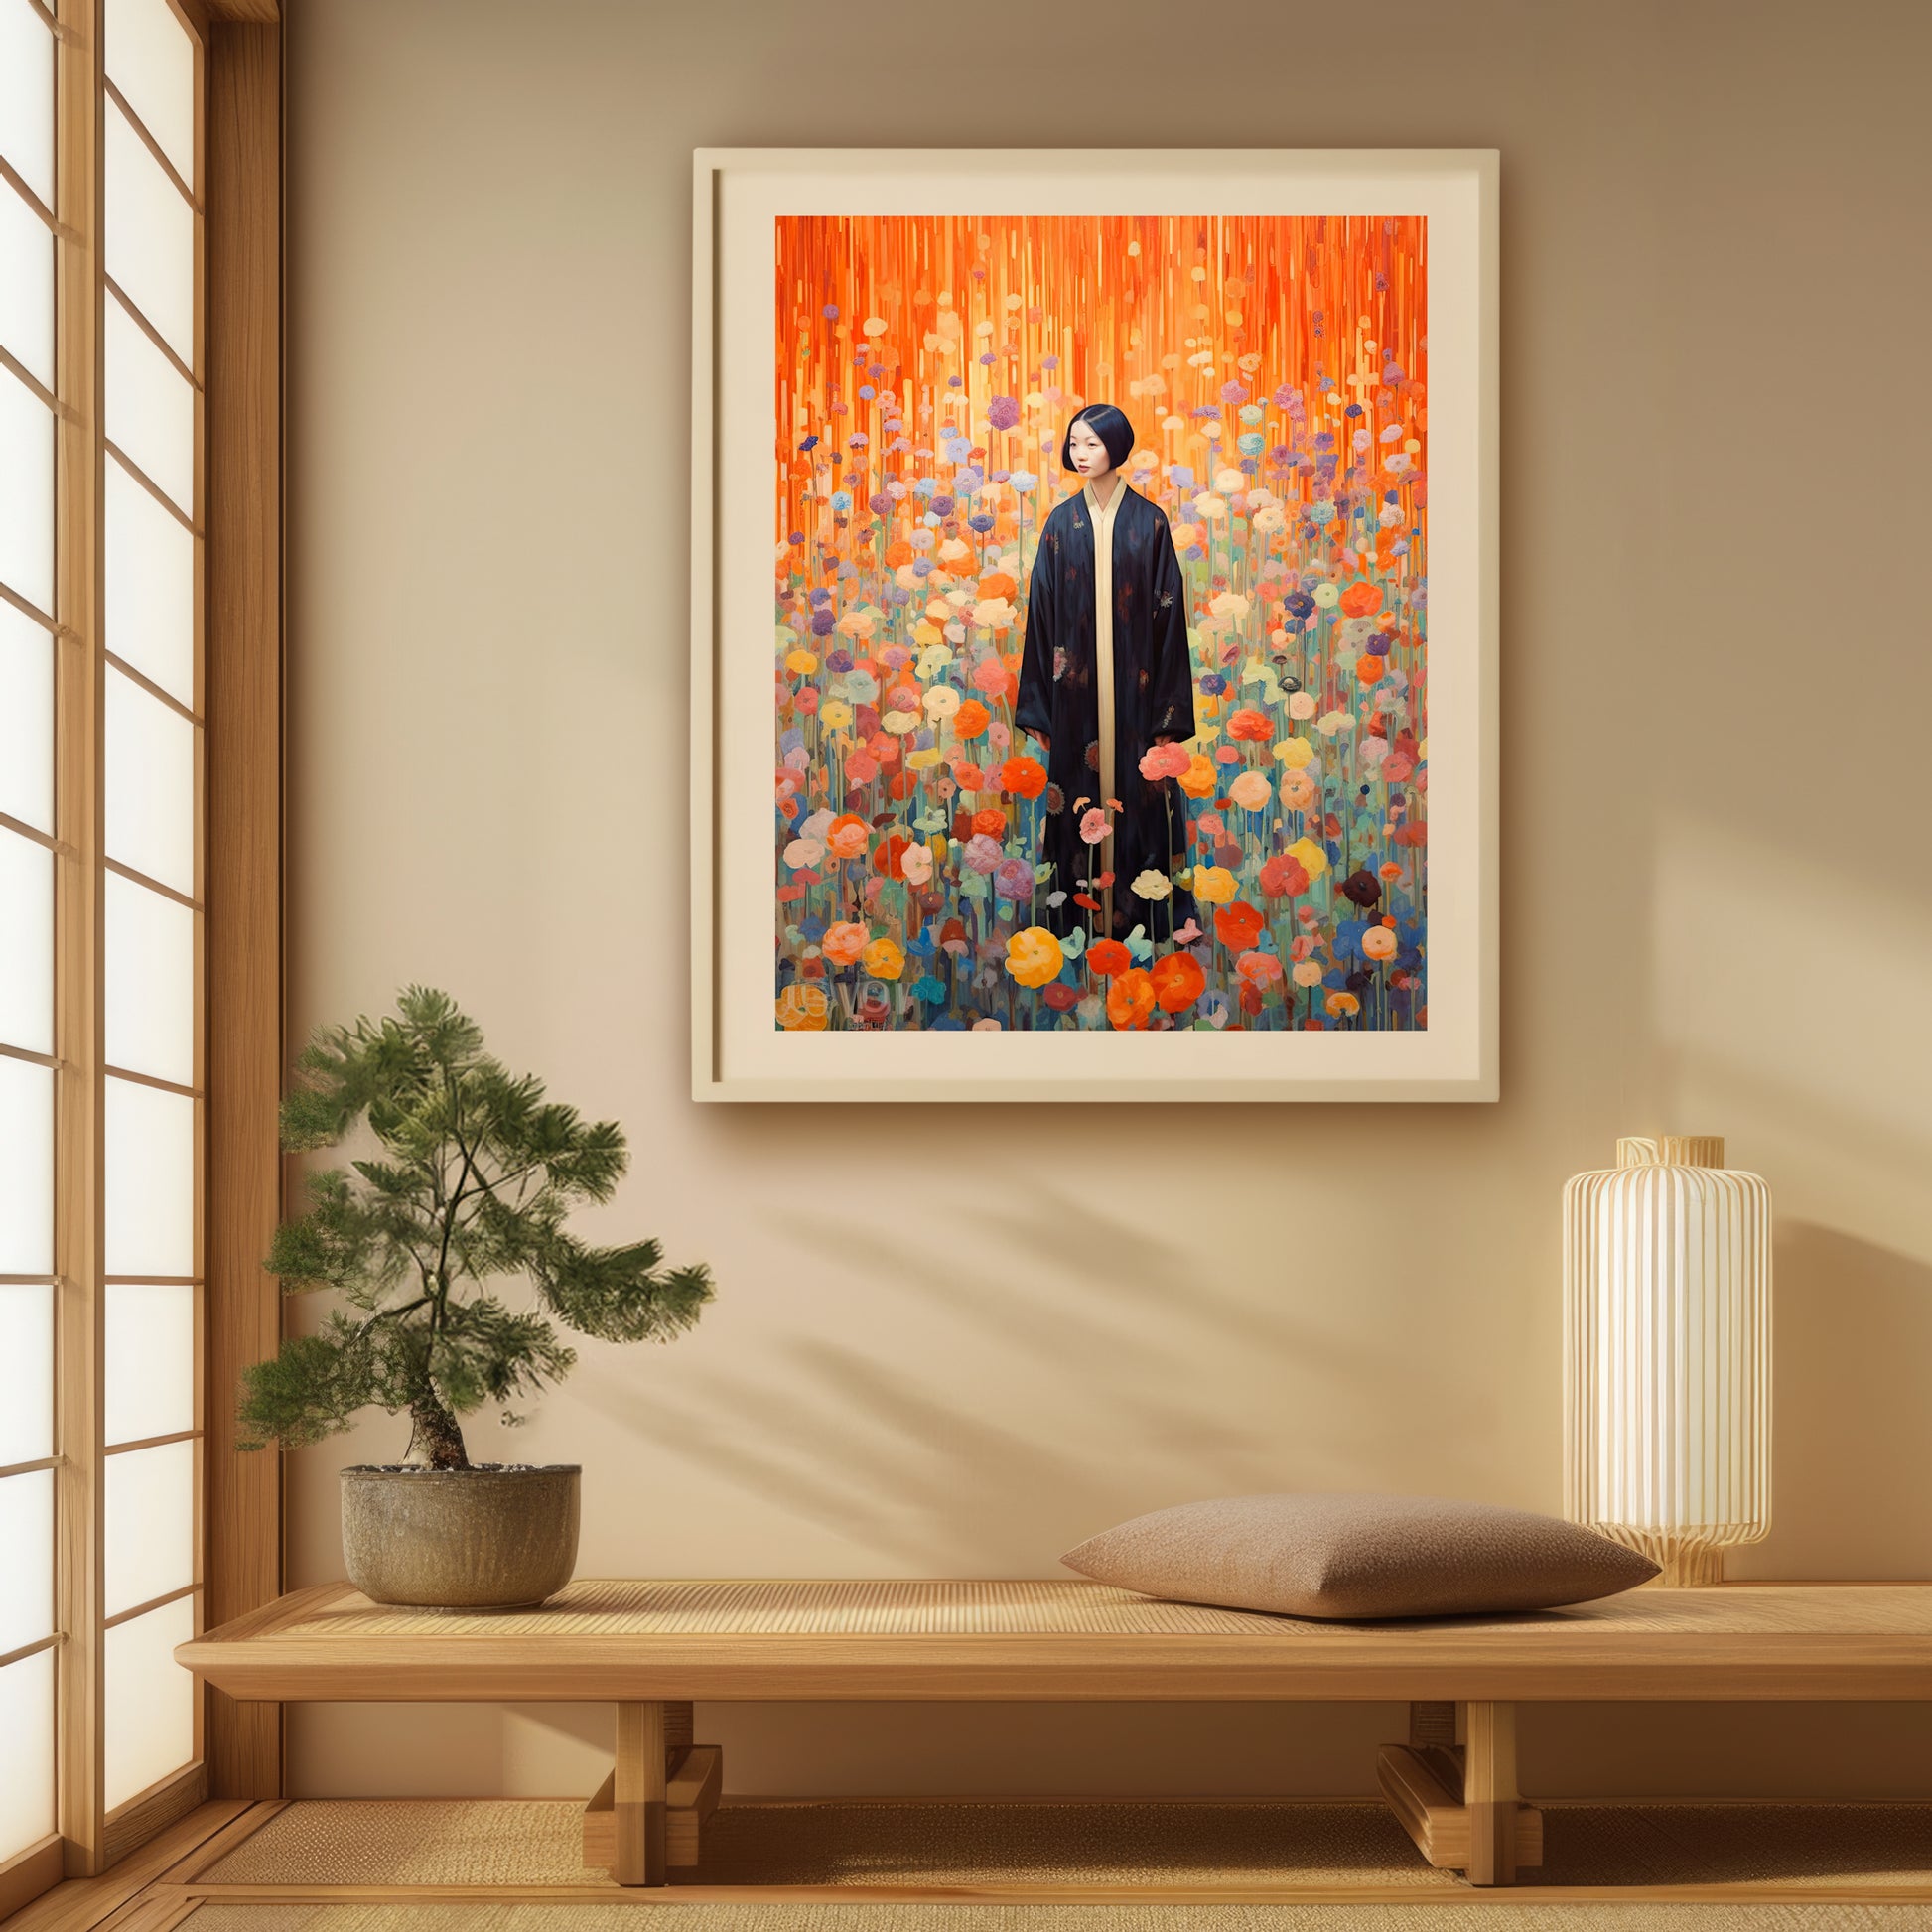 Fine art print featuring a woman in a traditional black robe, standing amidst a vibrant field of colorful flowers, set against a background of cascading orange and yellow hues. This art print is a stunning example of an artwork print.